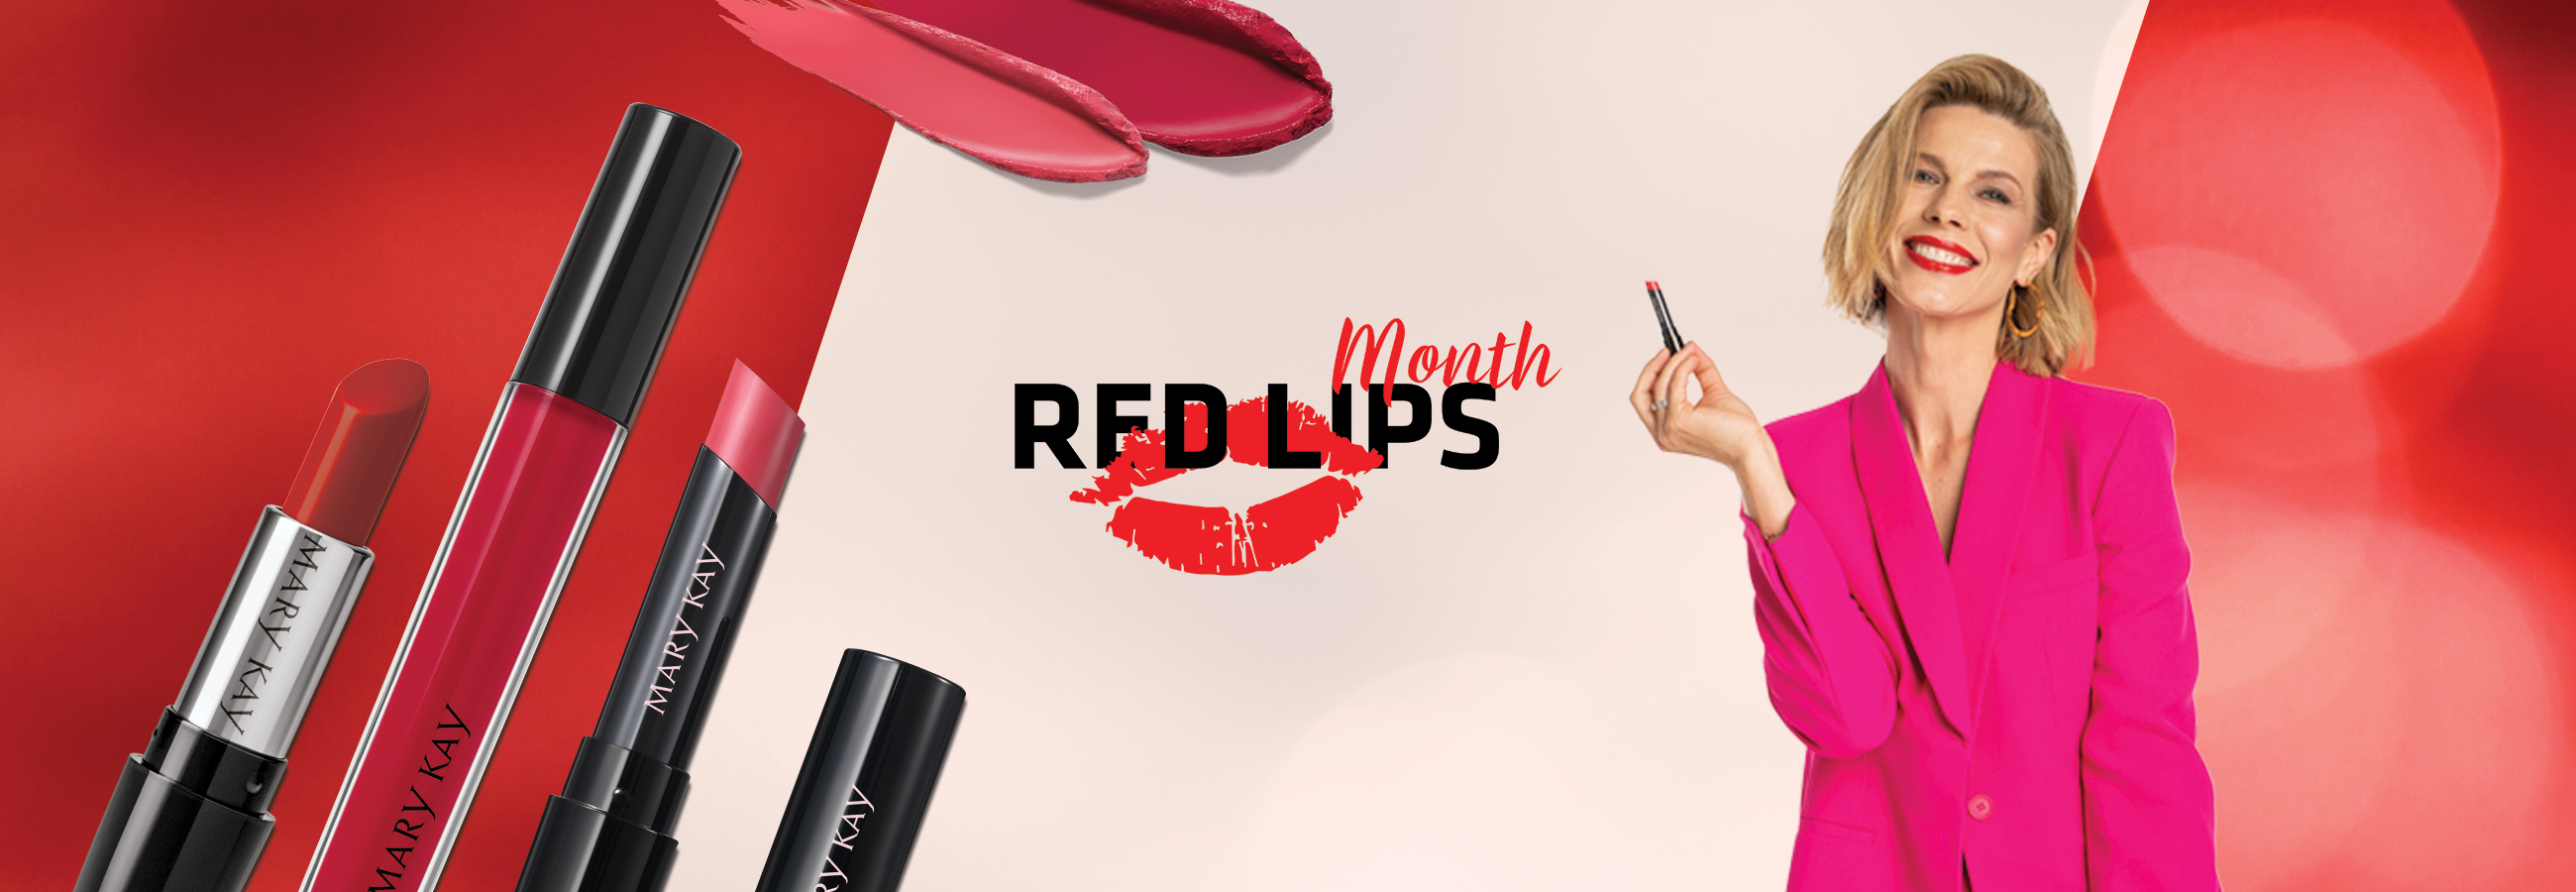 red_lips_month